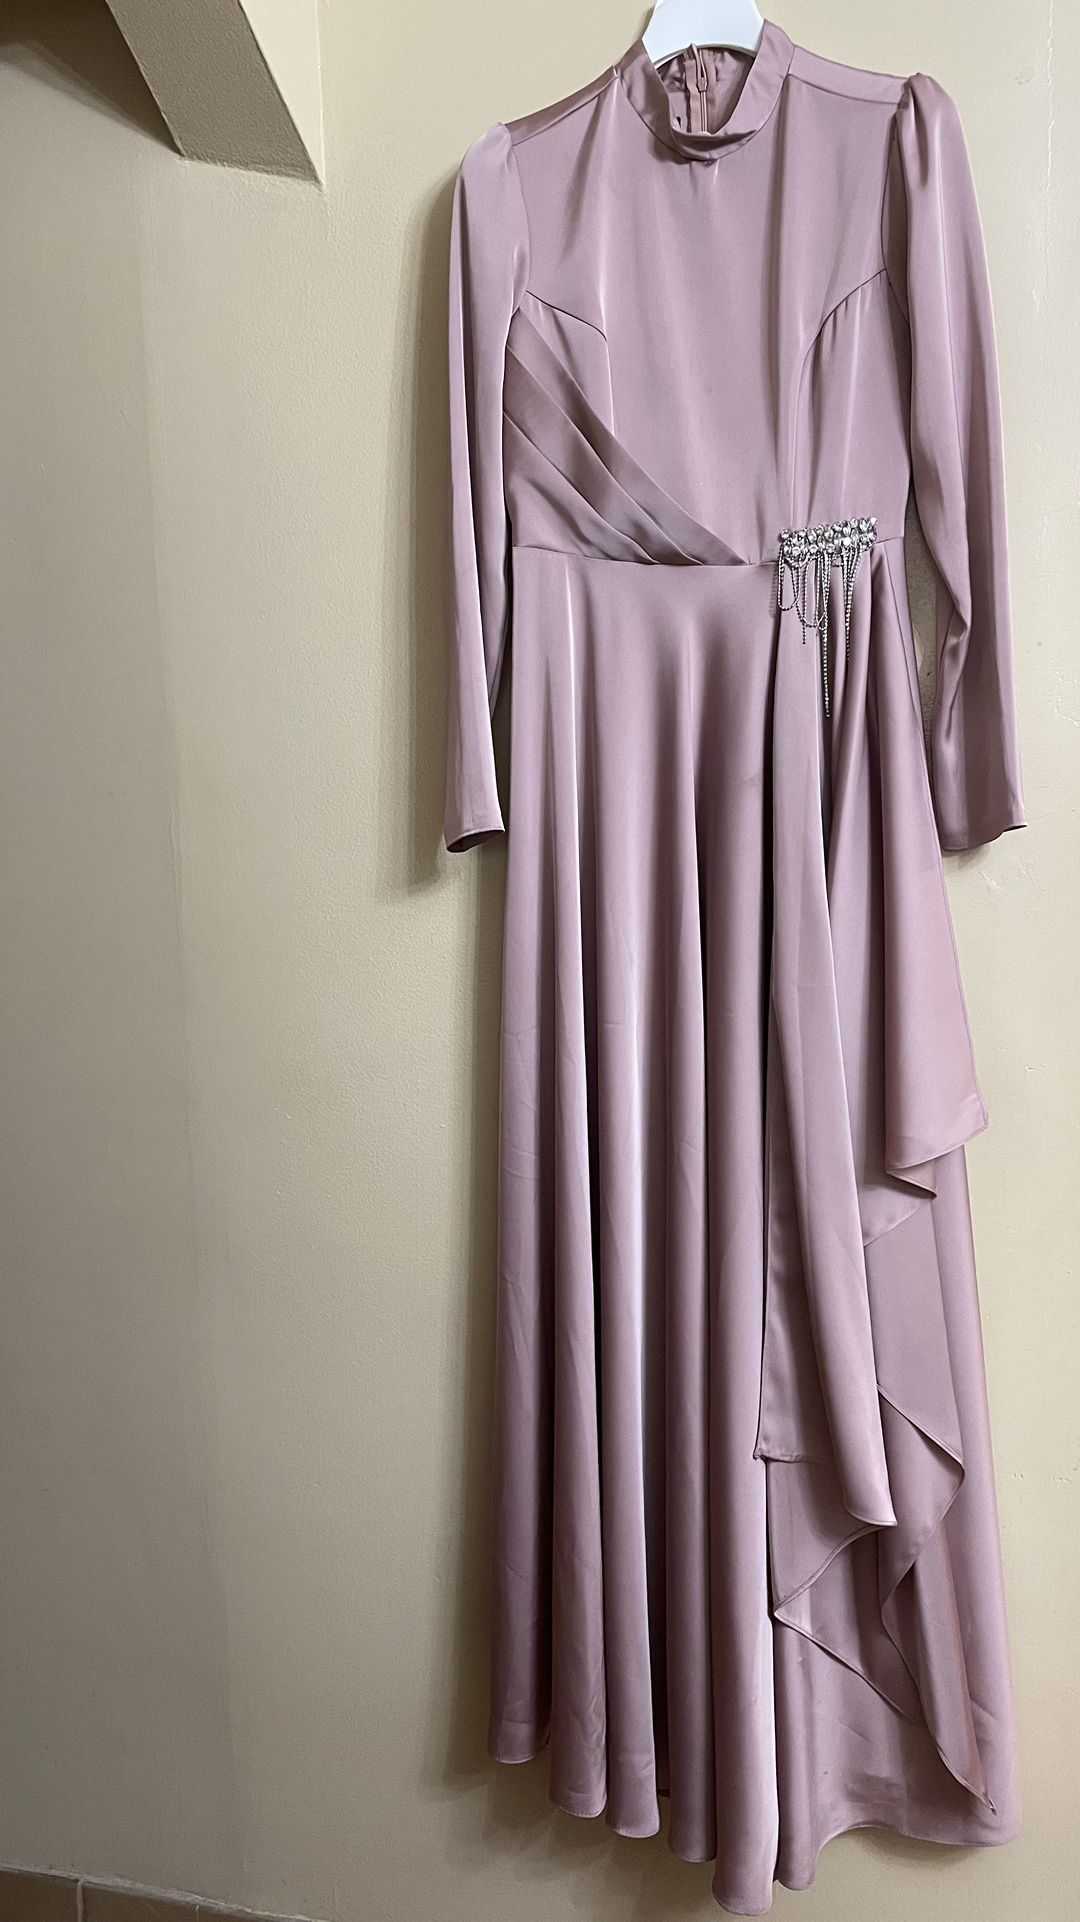 New Satin Dress With Draping 